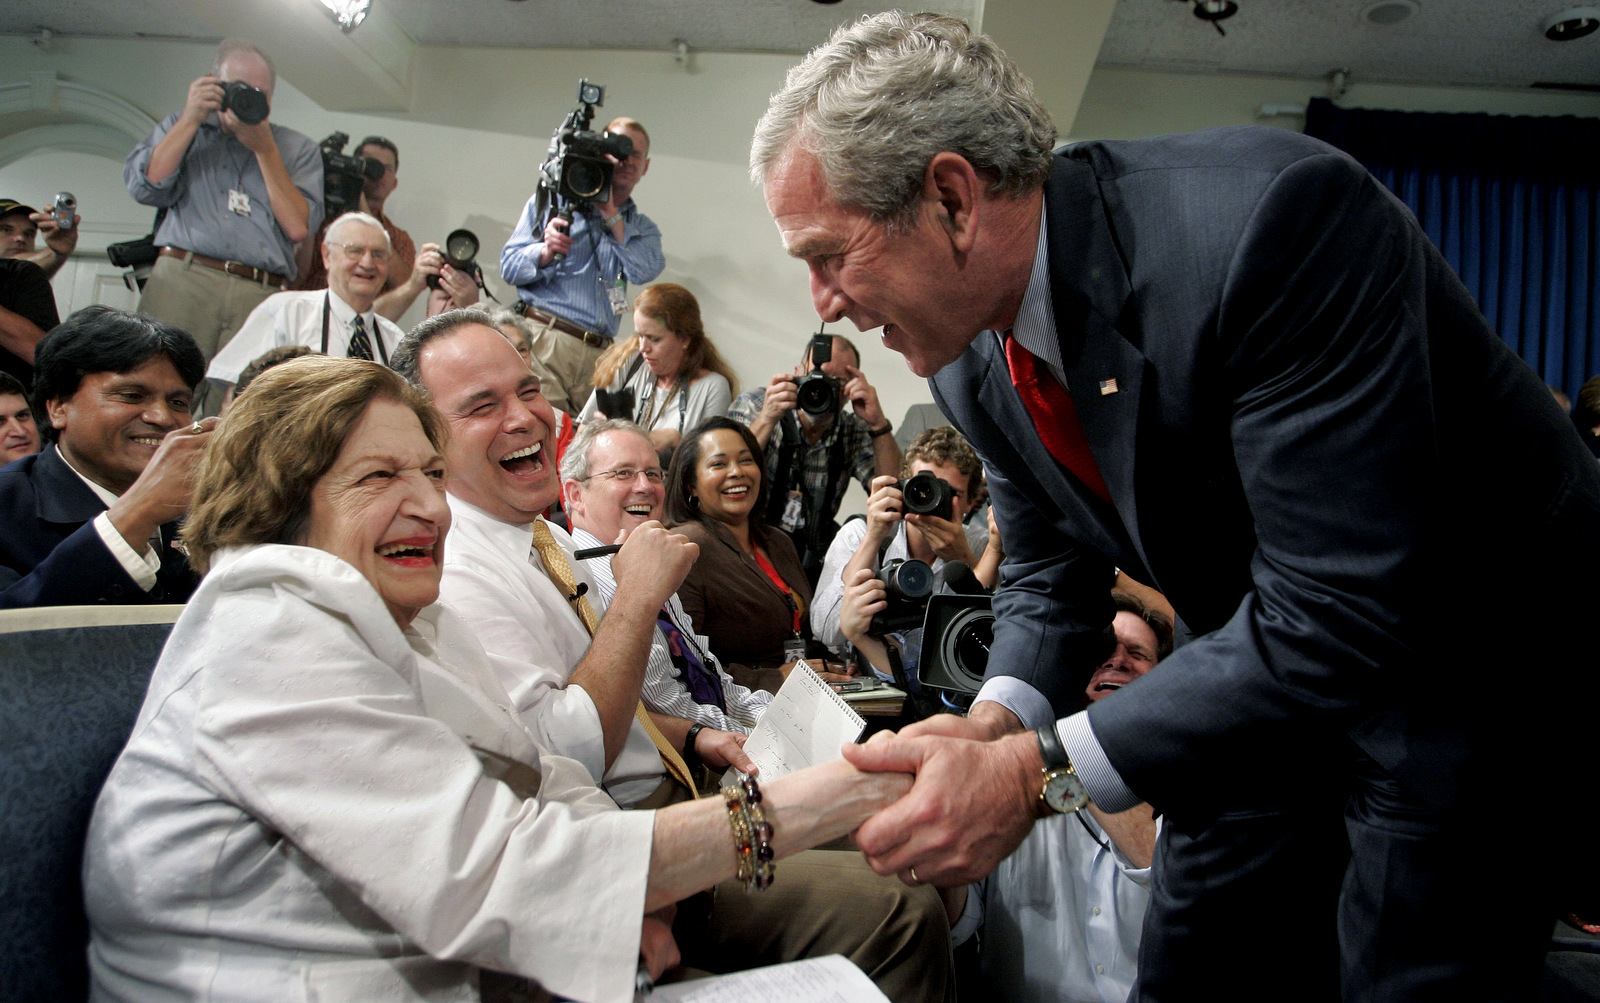 President Bush, right, greets veteran White House correspondent Helen Thomas. Thomas, was a correspondent for more than 50 years before she fired due to comments her critics described as anti-Semitic. (AP/Charles Dharapak)